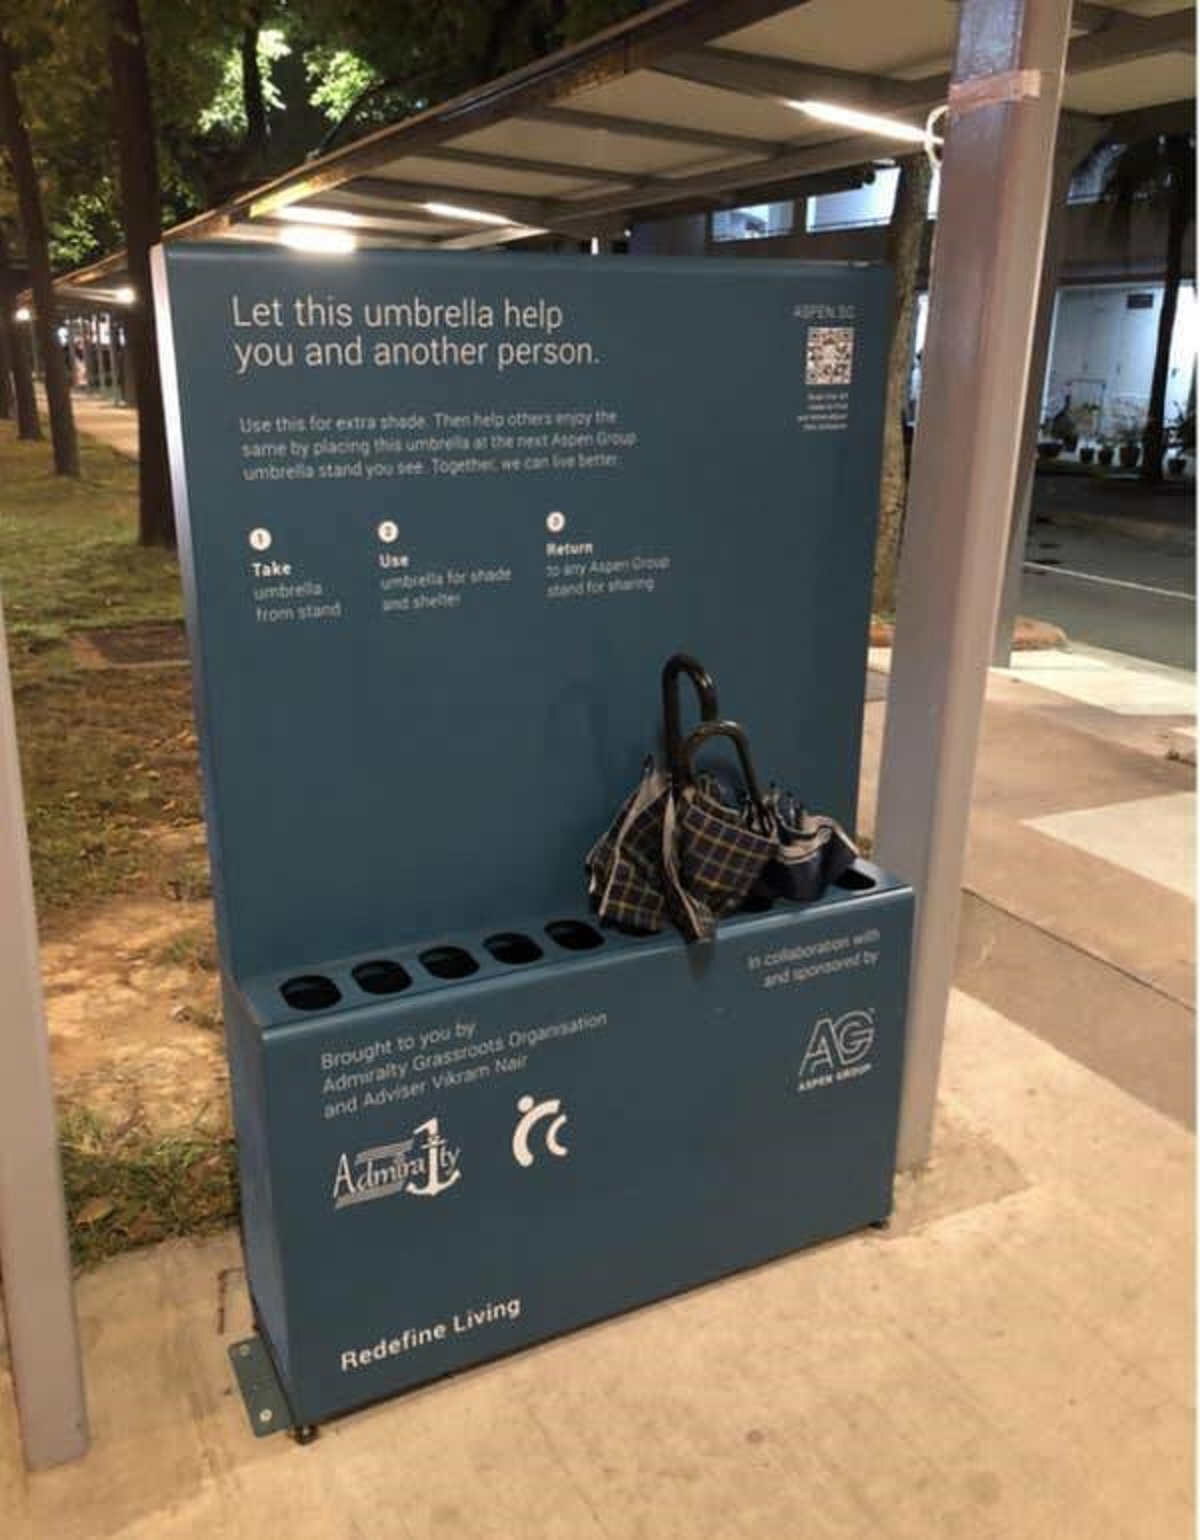 And in Singapore, there's an umbrella-sharing project where you can just take one when you need one!